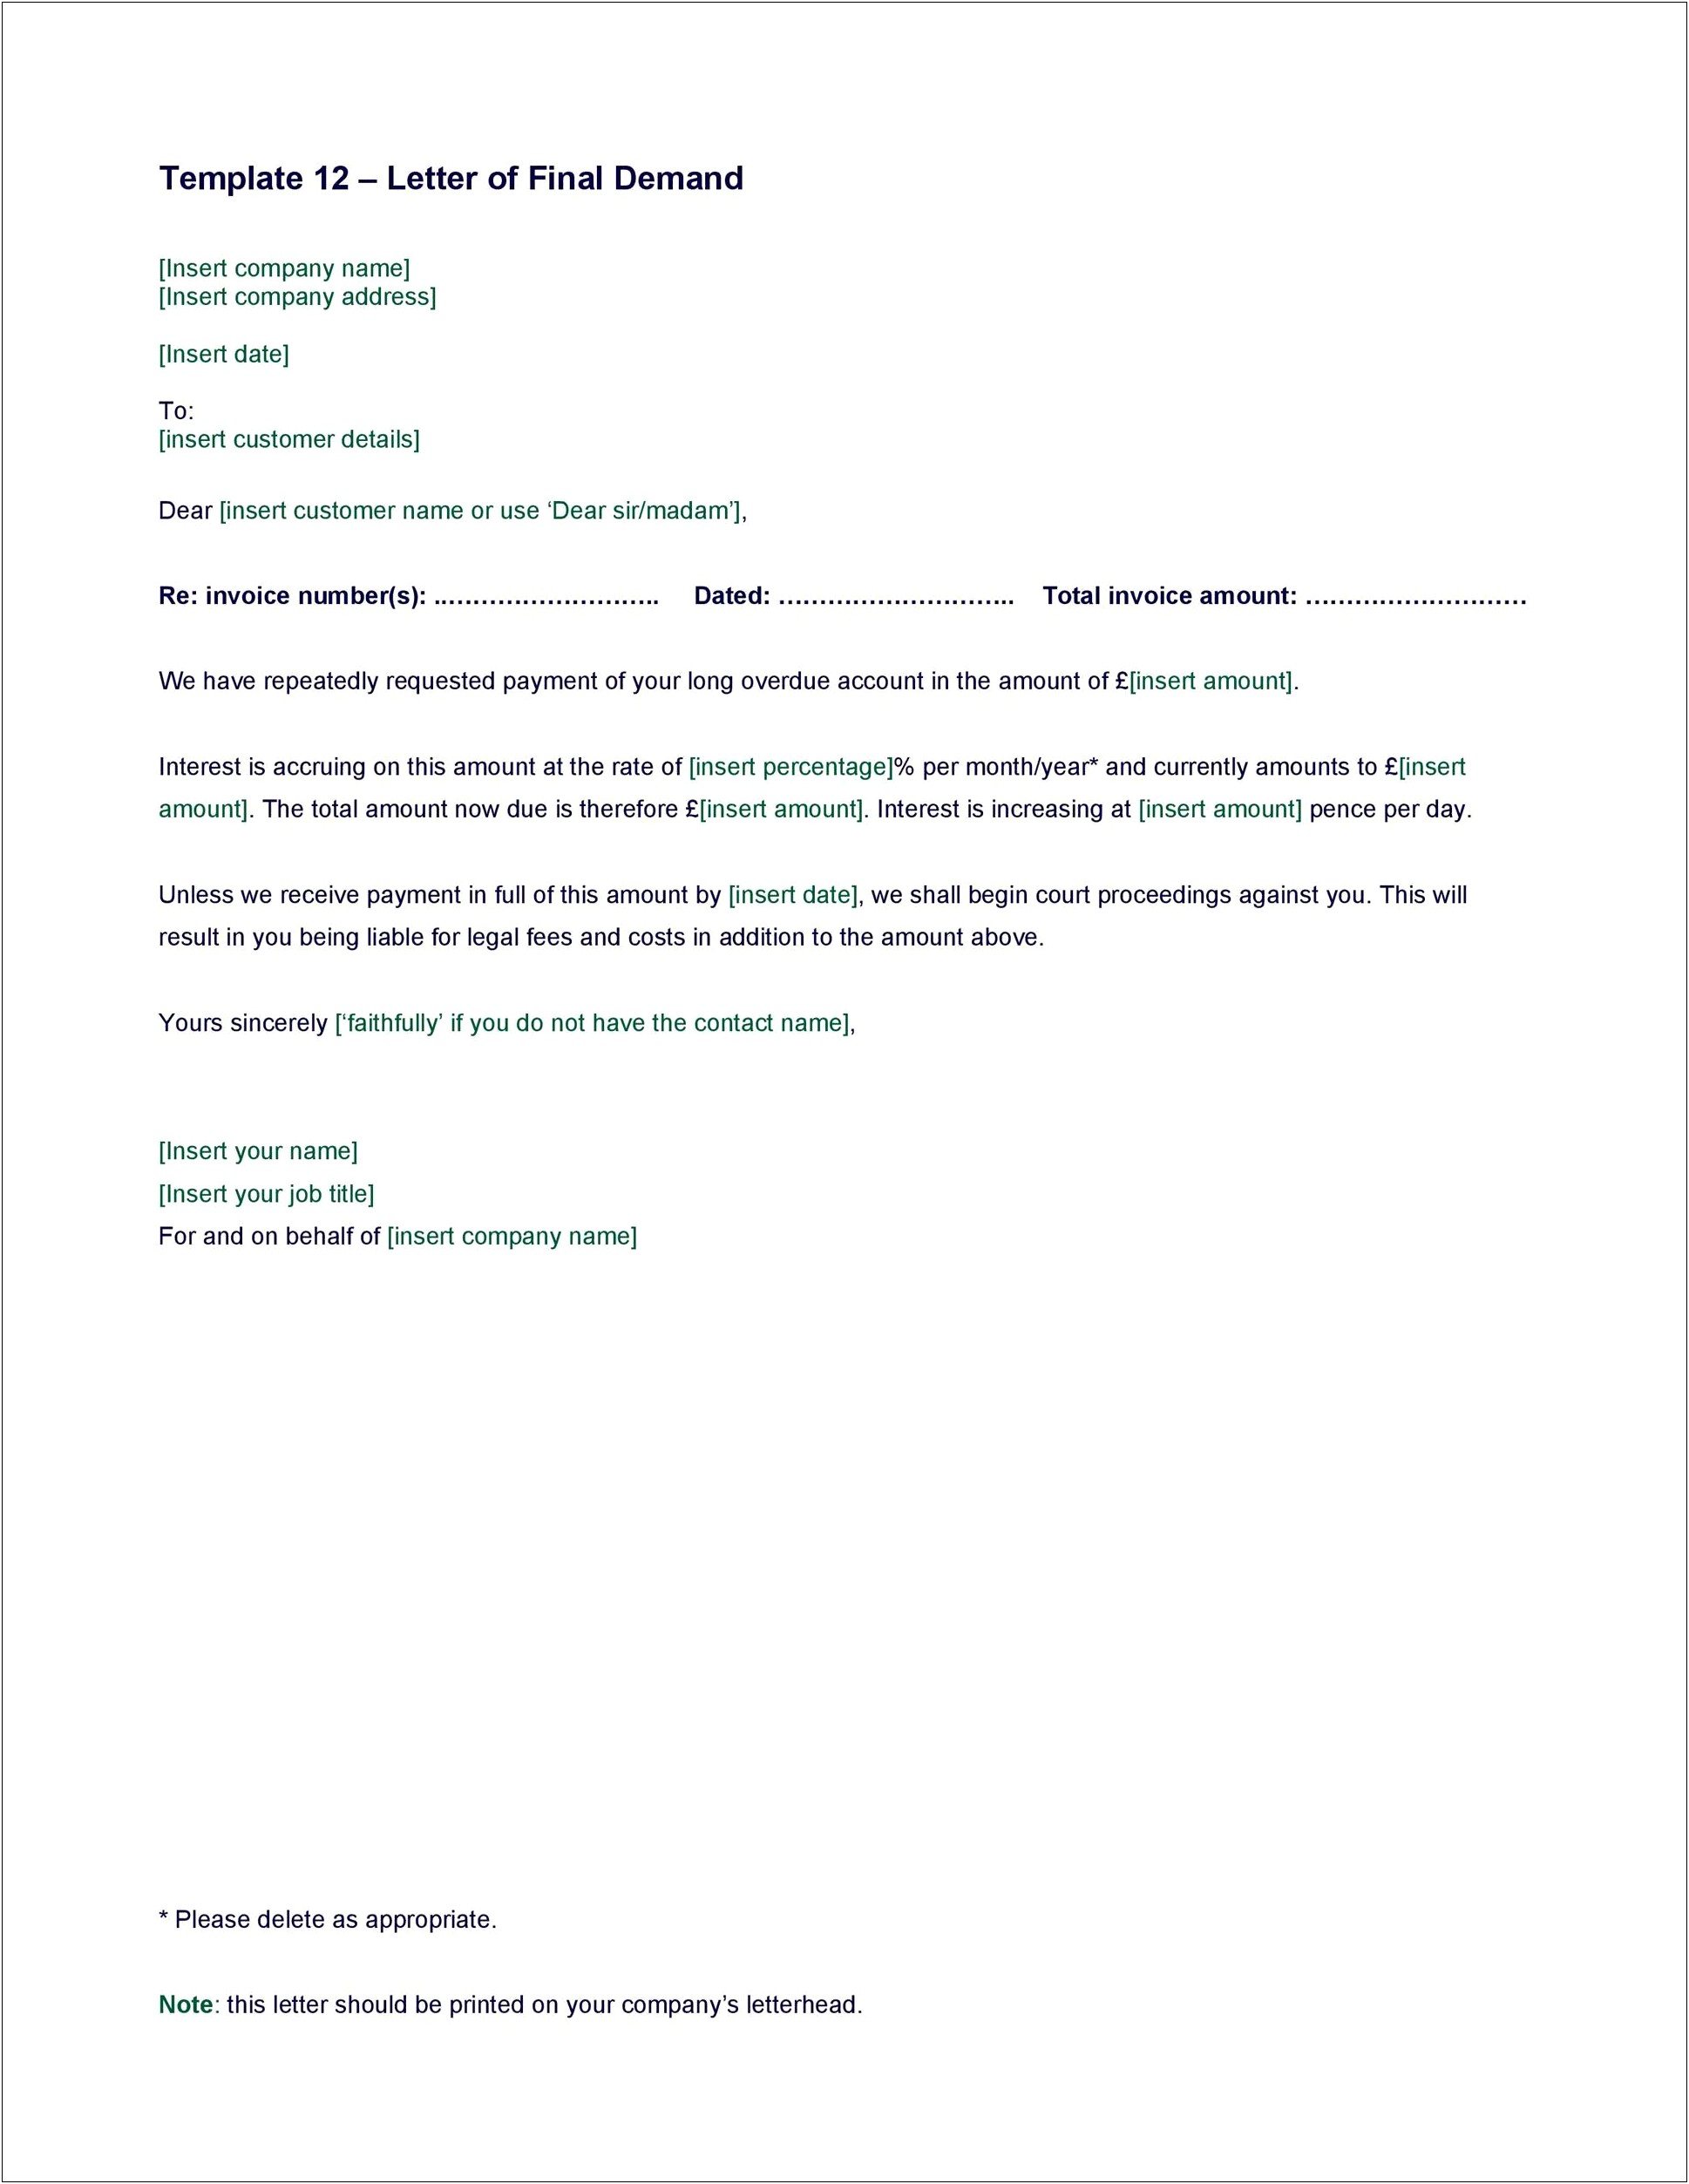 Fair Trading Letter Of Demand Template